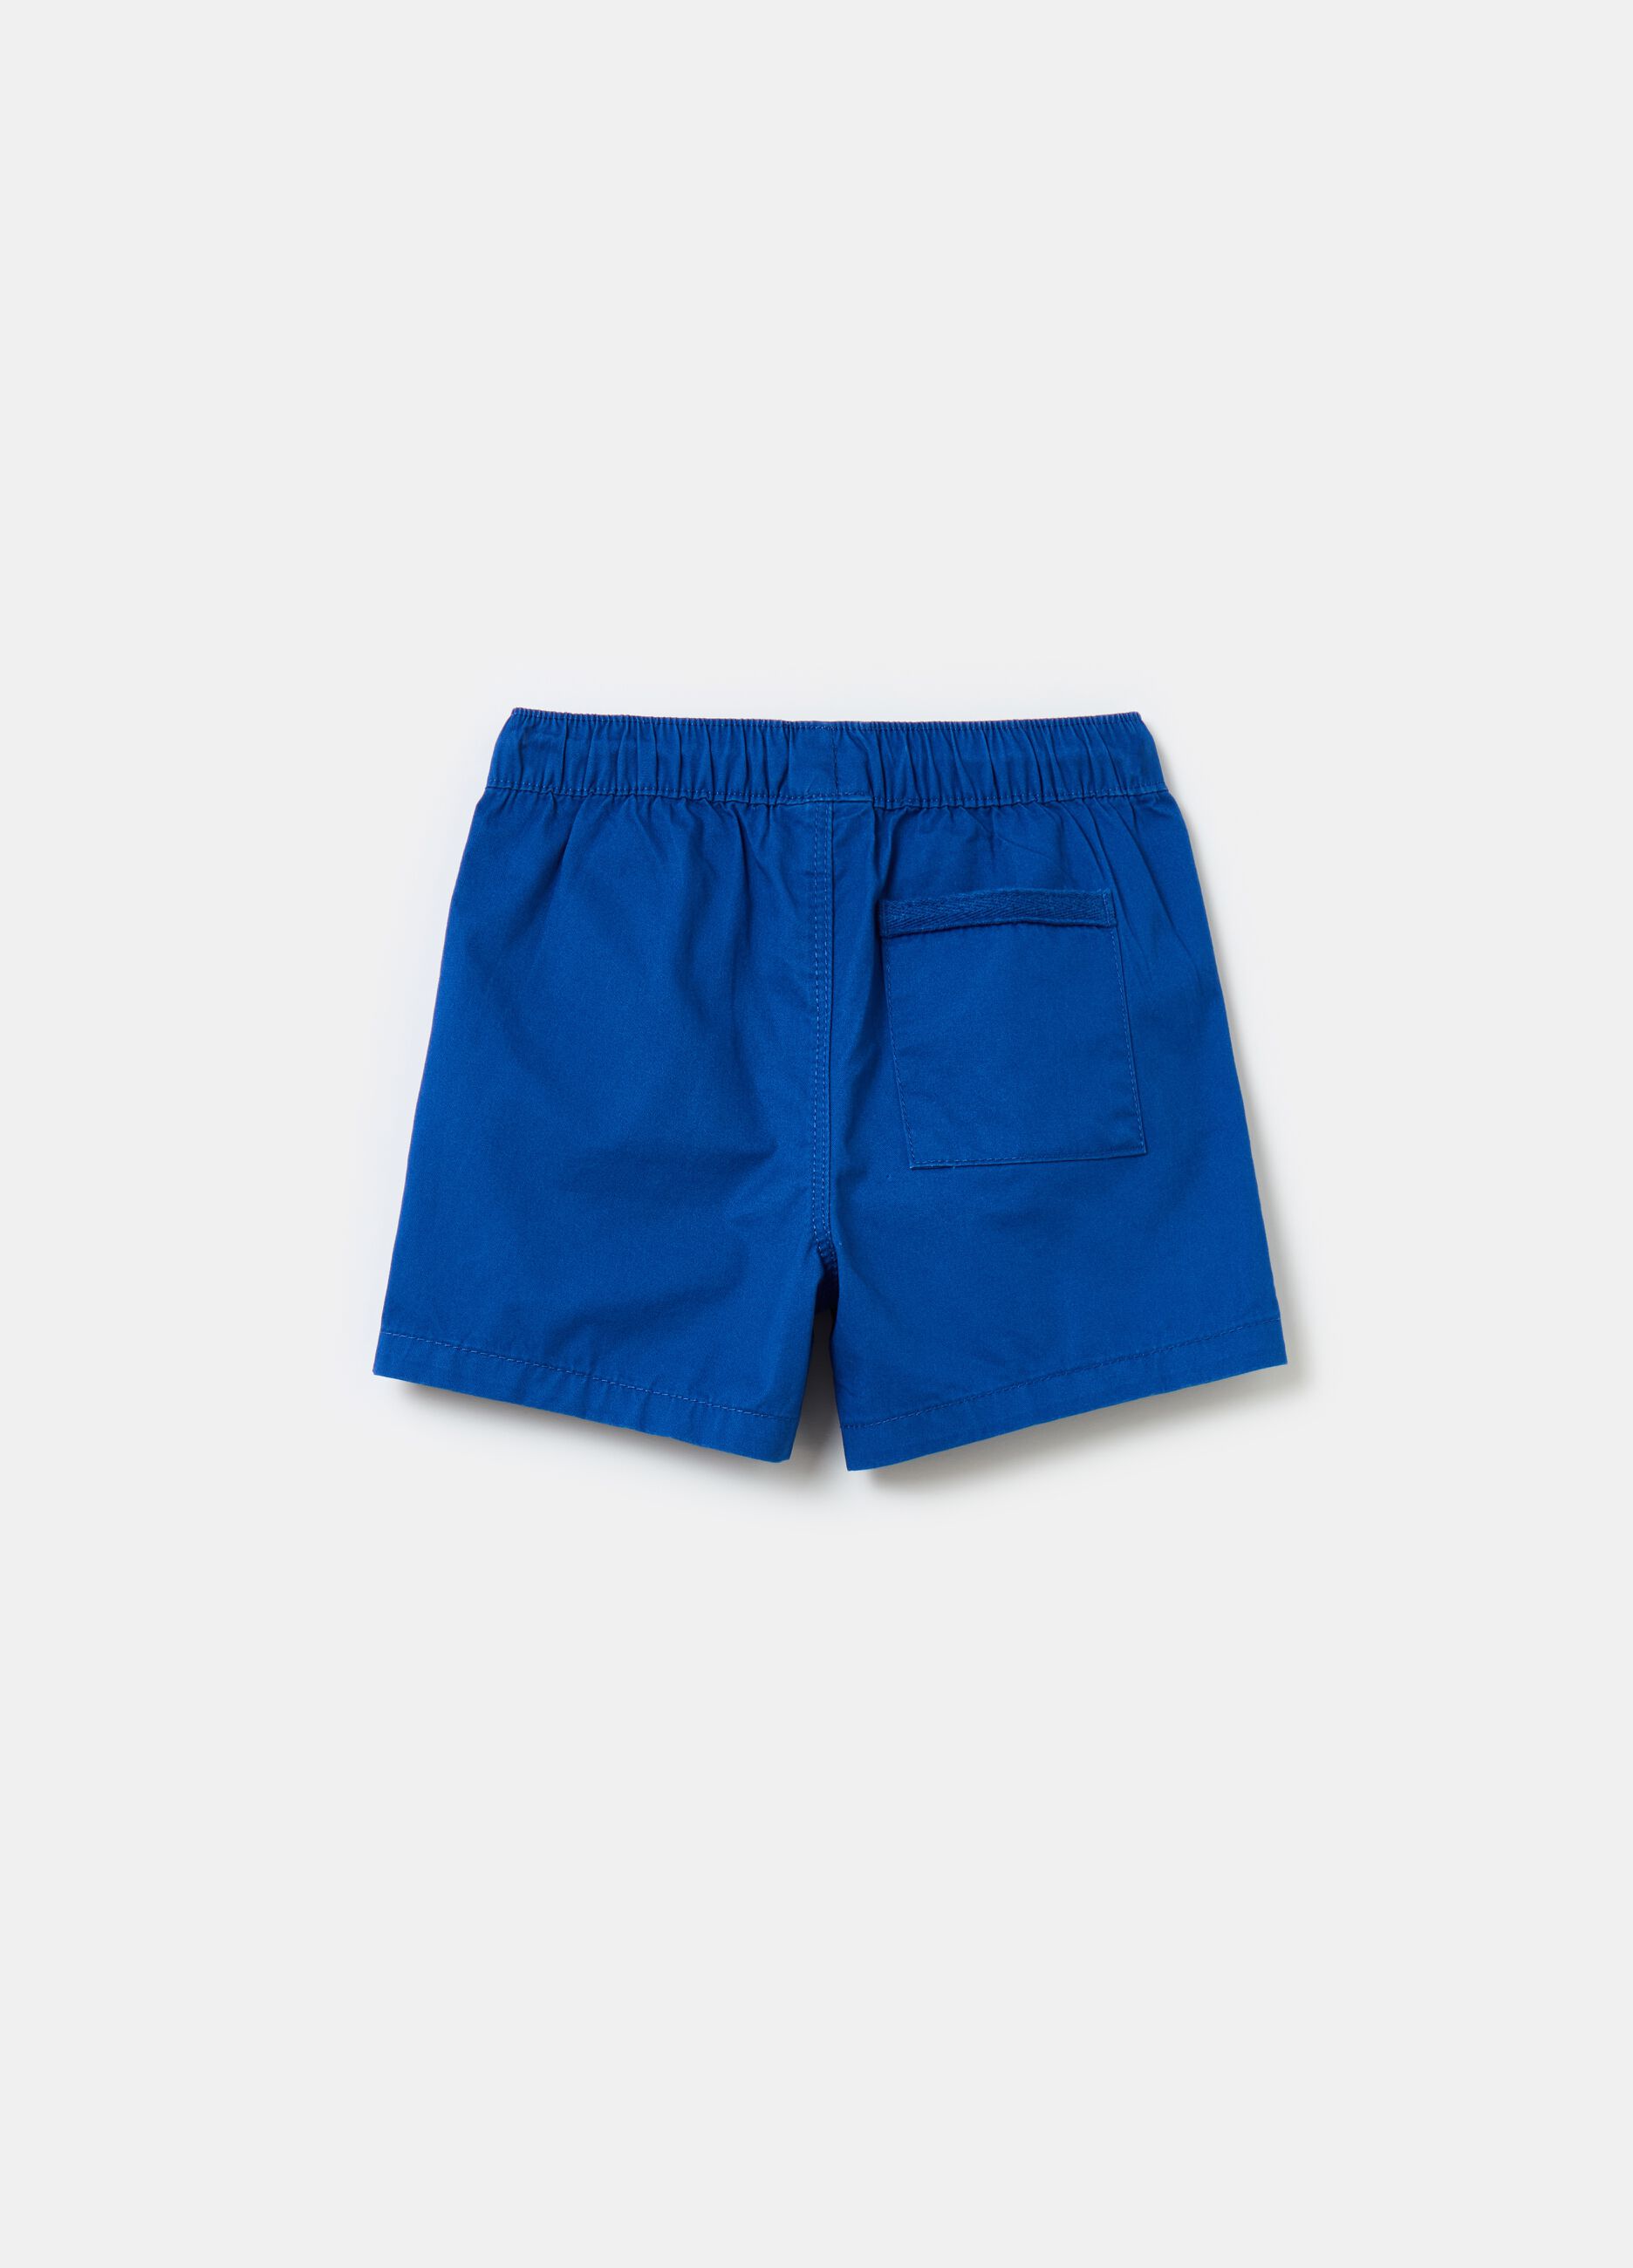 Shorts in popeline con coulisse